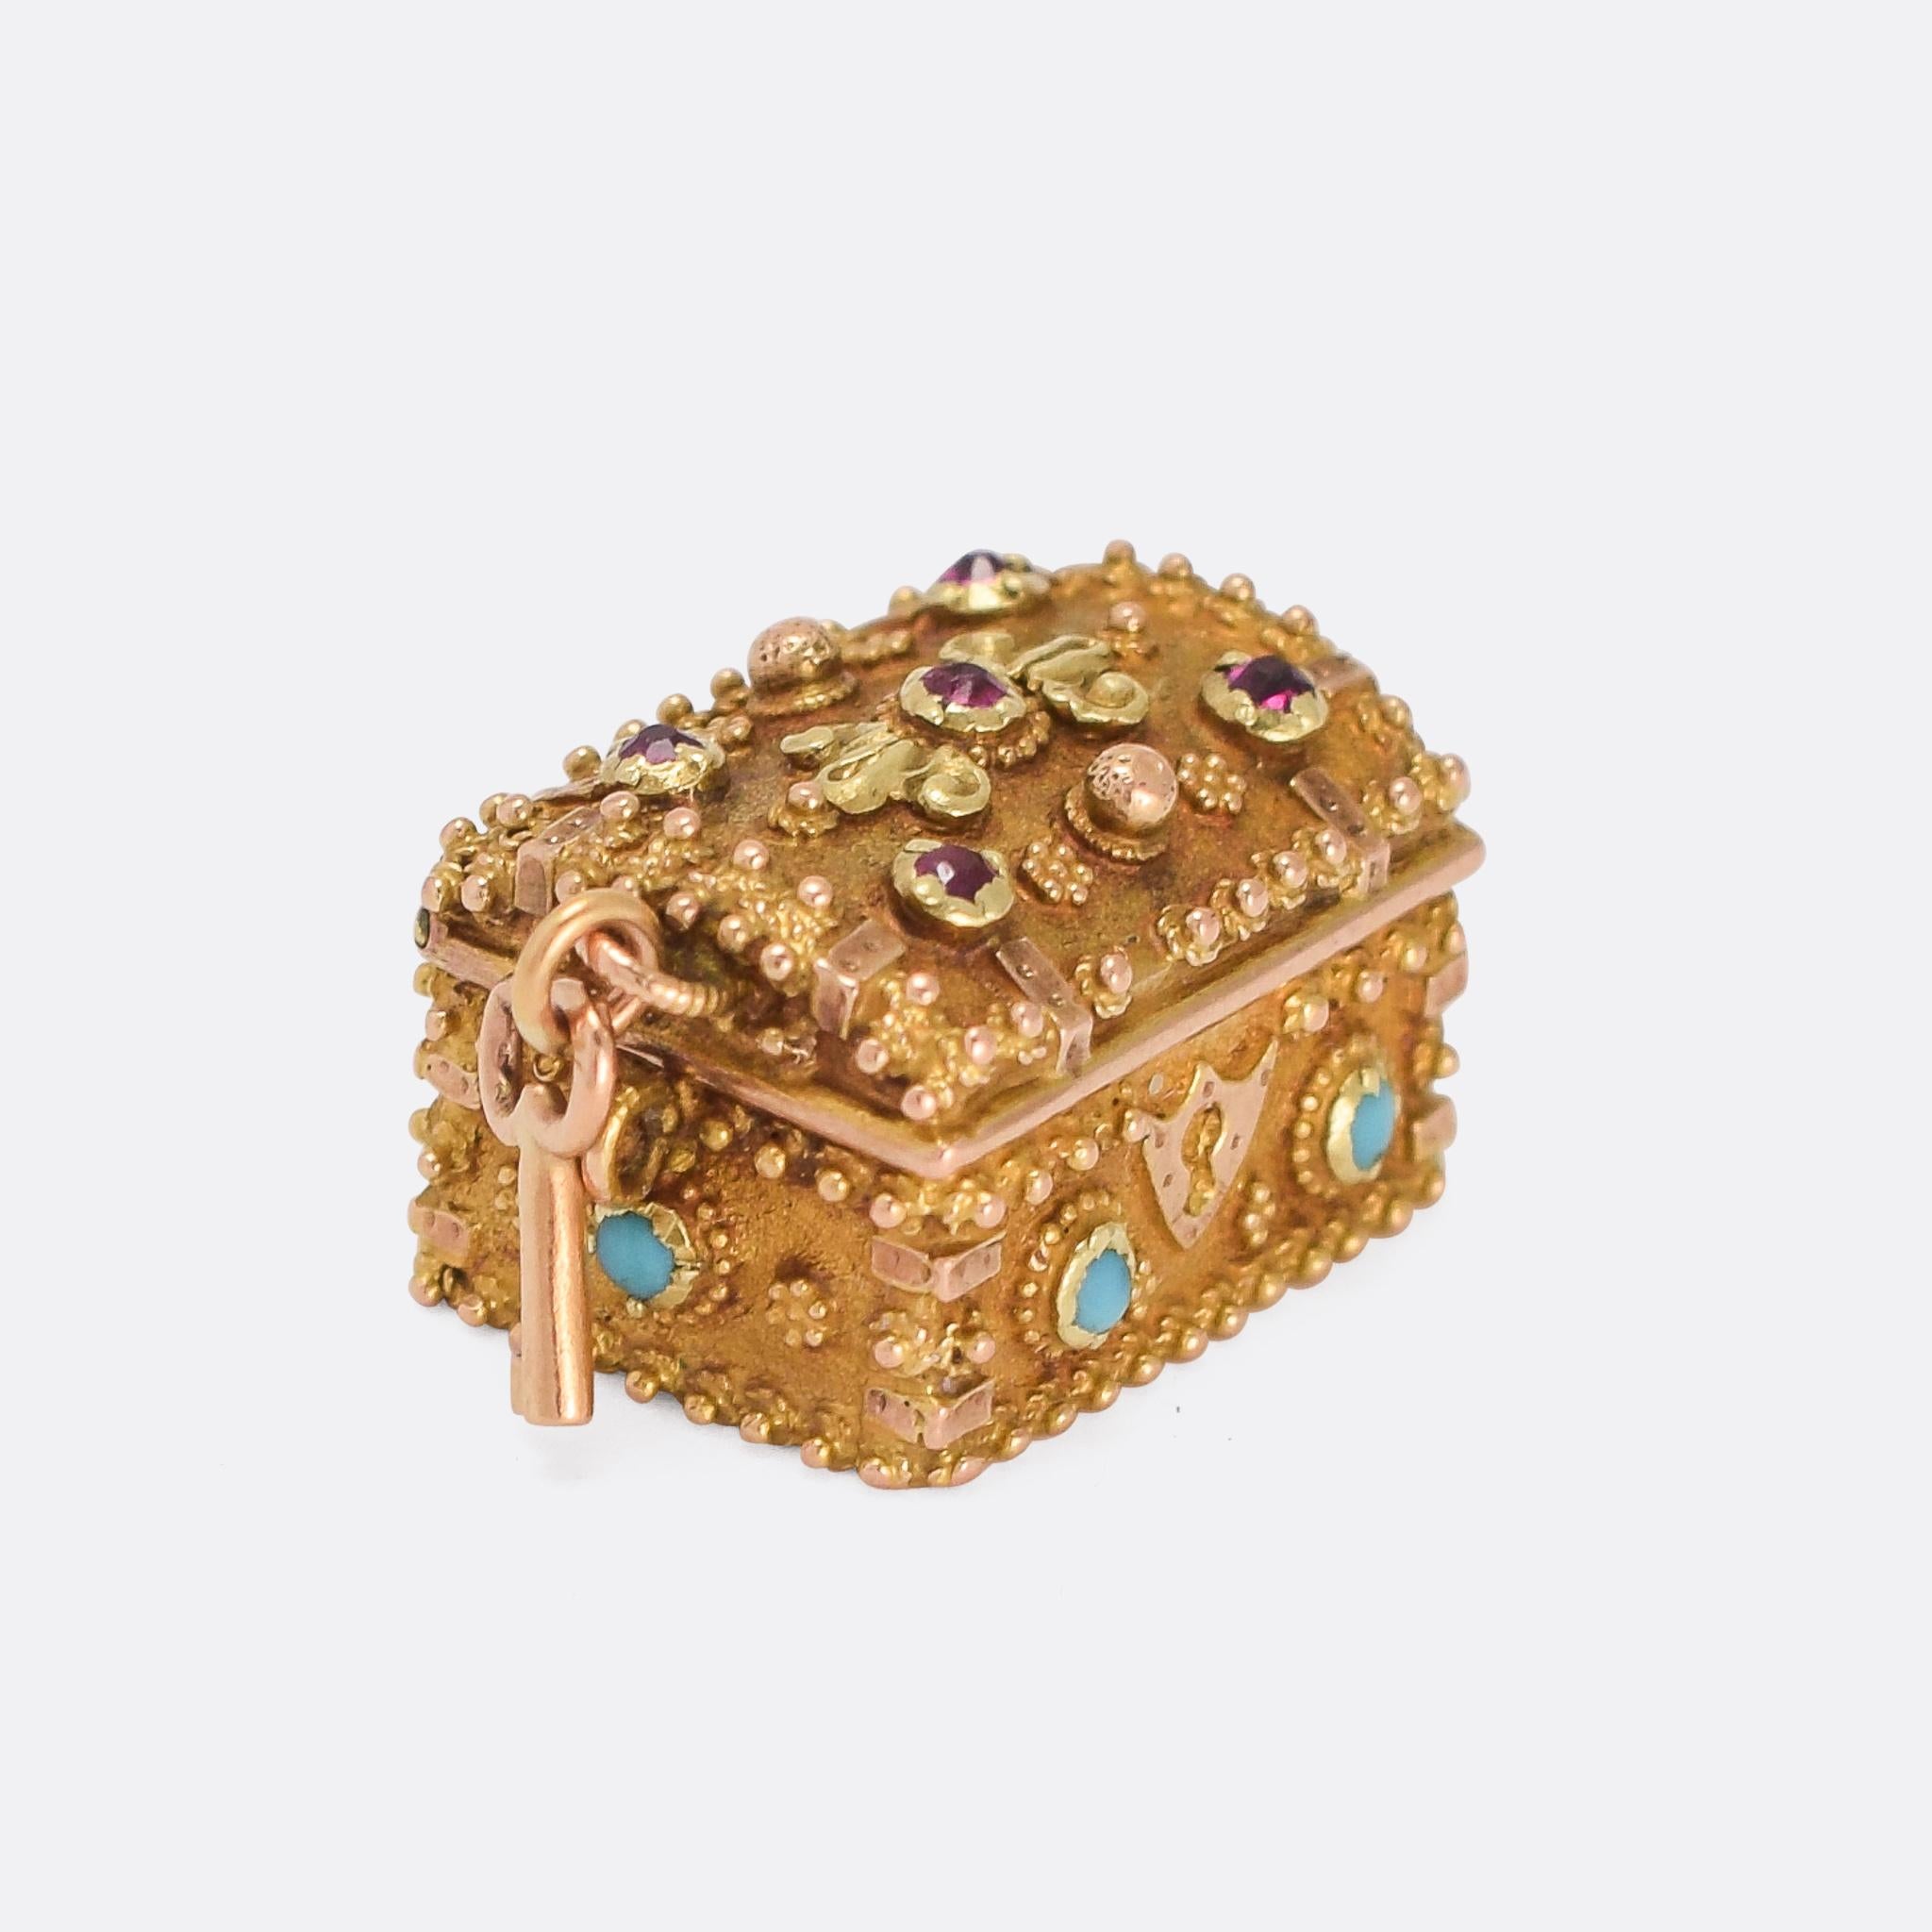 Treasure! A wonderful Regency Period charm locket modelled as a treasure chest. It's beautifully worked in two-tone gold, with applied granulation and exquisite details. It's set with ruby and turquoise cabochons, and opens up to reveal a concave